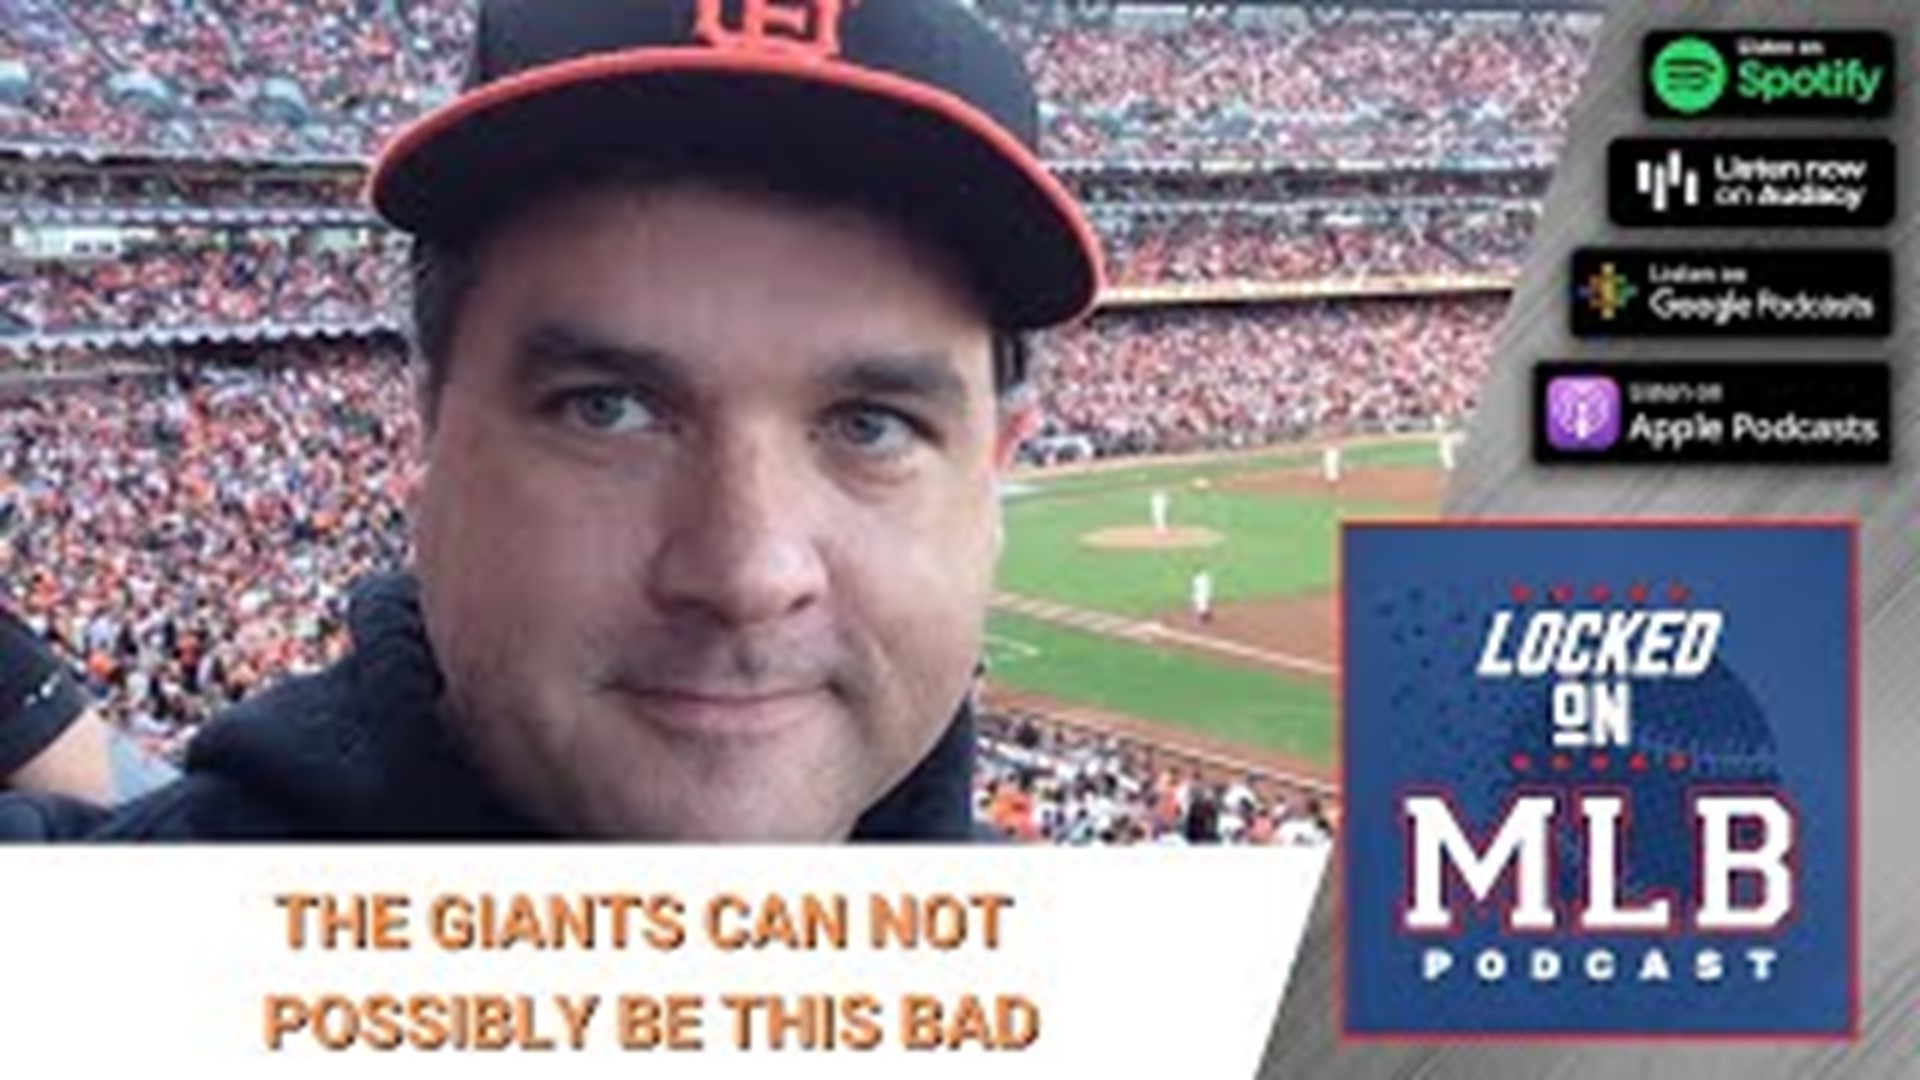 The Giants Can Not Be This Bad - Locked on MLB